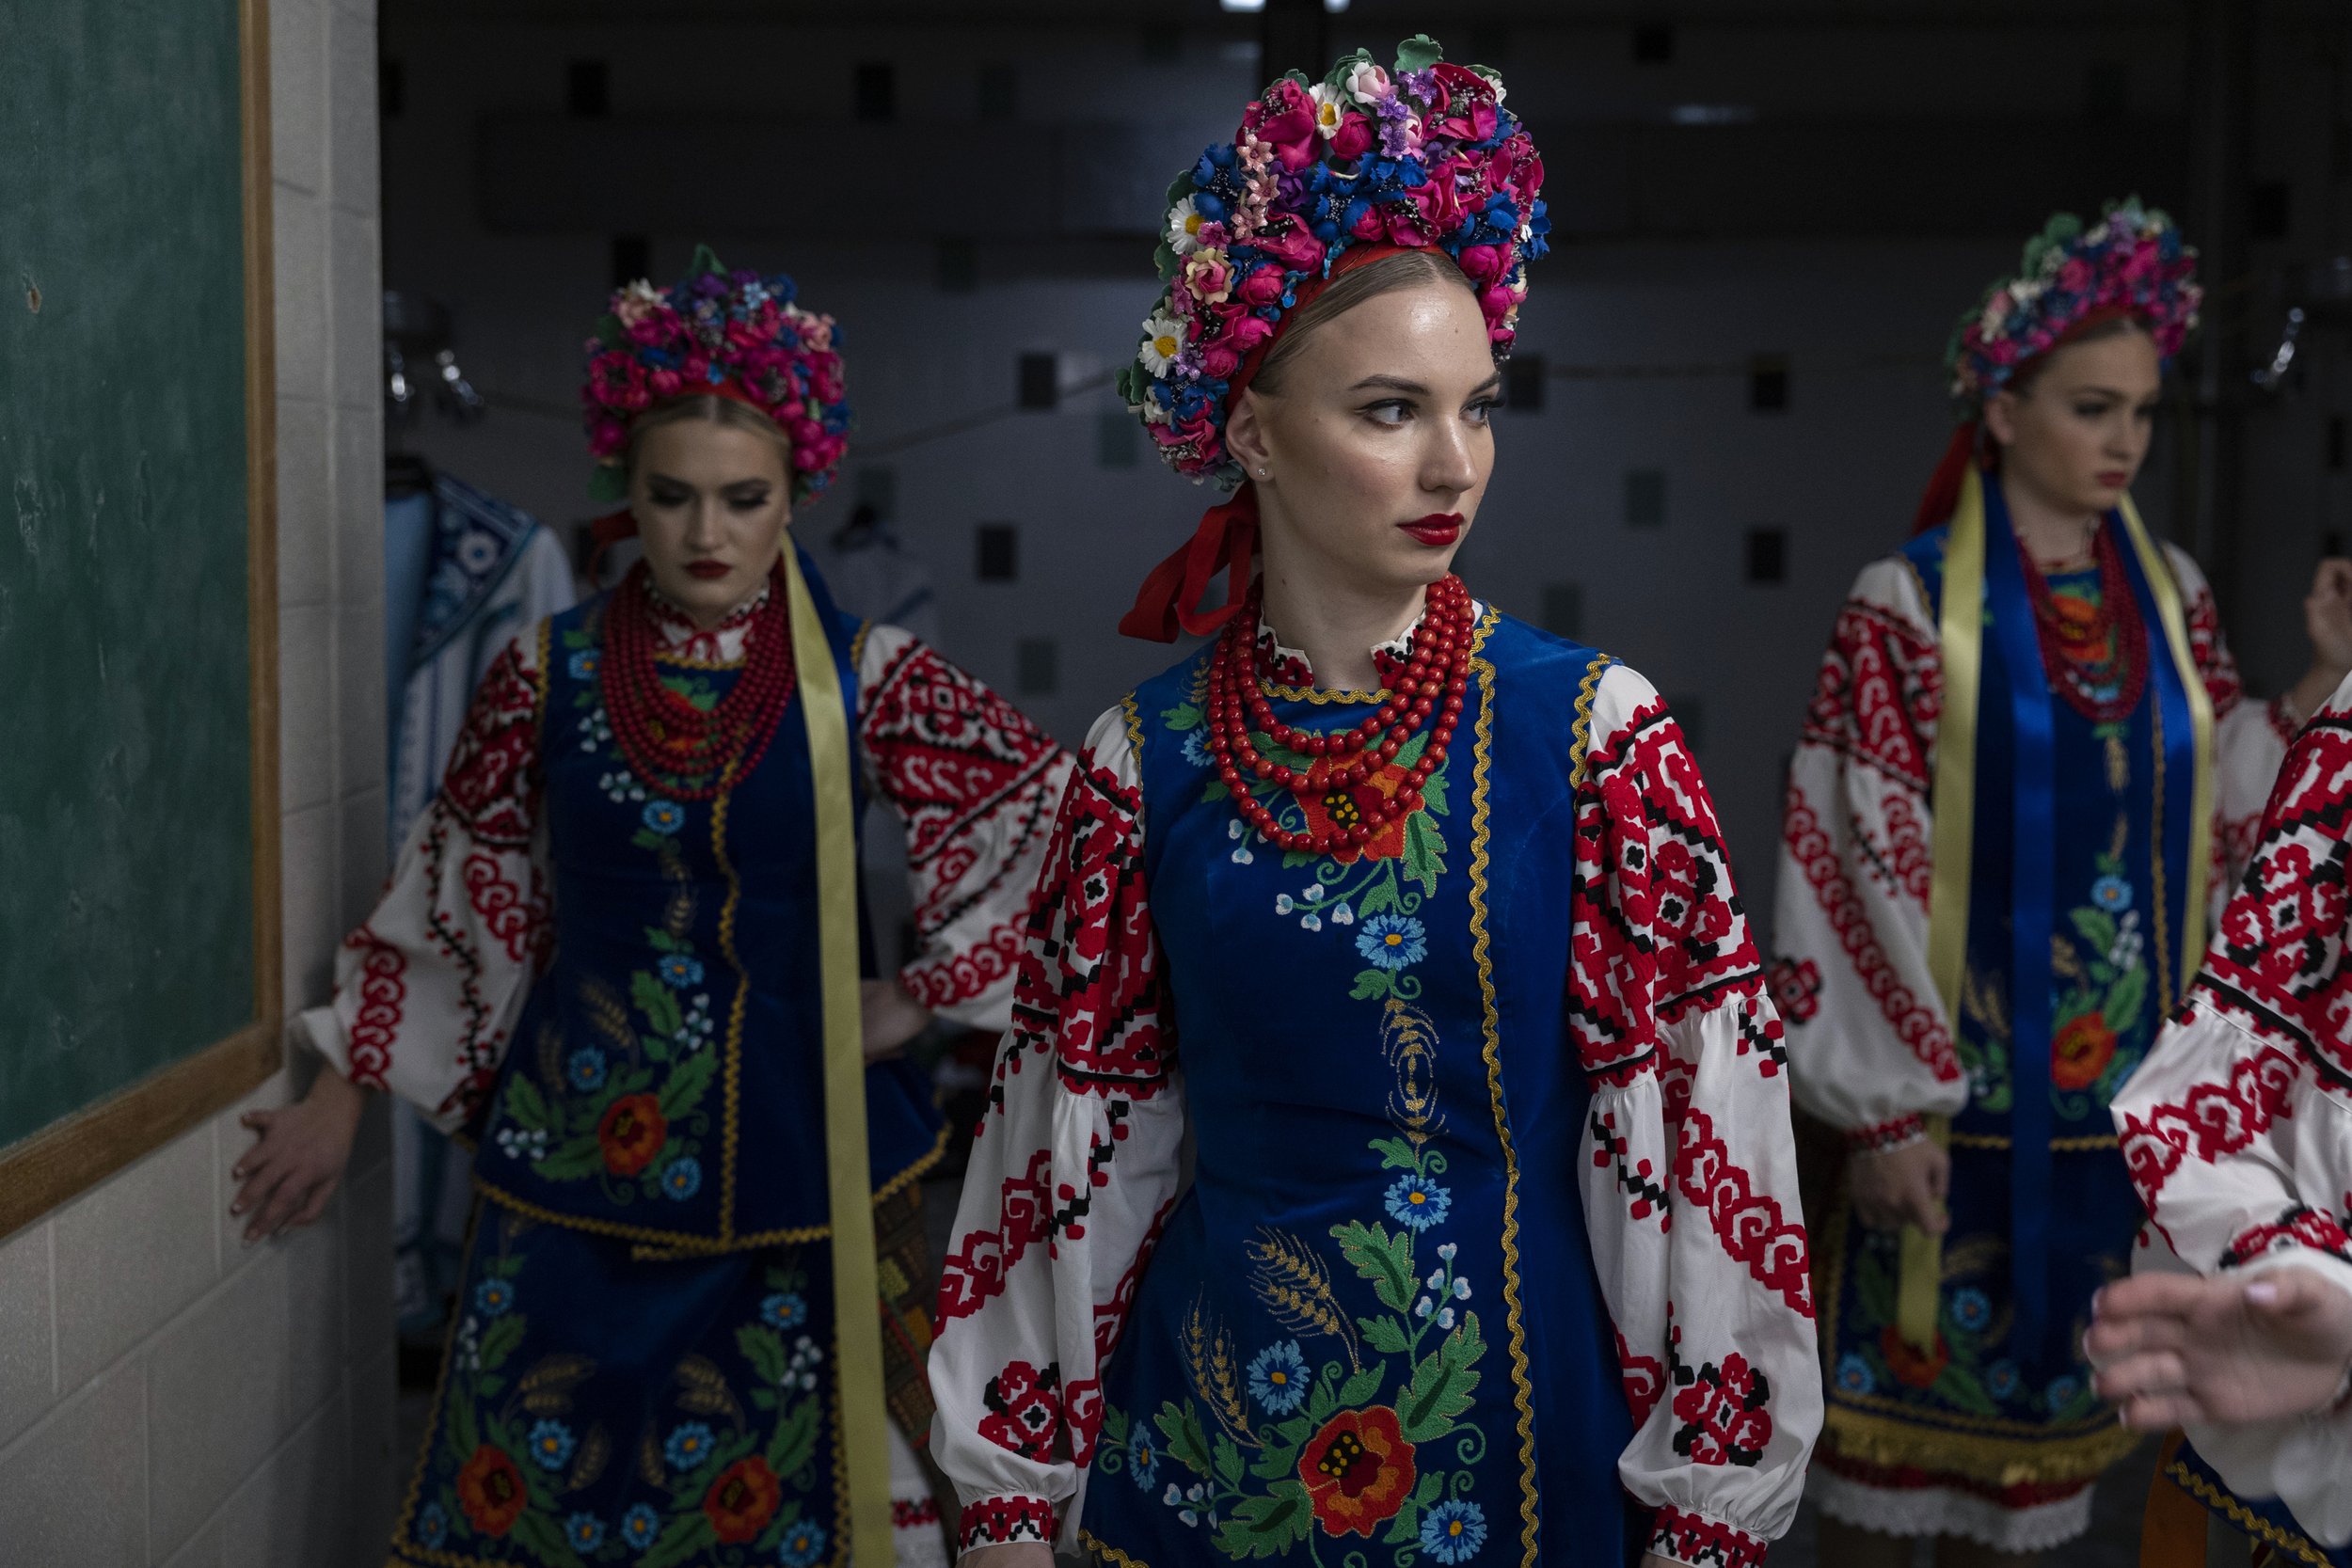  Dariya Medynska (center) gathers with other members of the Voloshky Ukrainian dance ensemble before the International Spring Festival at North Penn High School in Lansdale, Pennsylvania on April 23, 2022. (On assignment for NPR) 